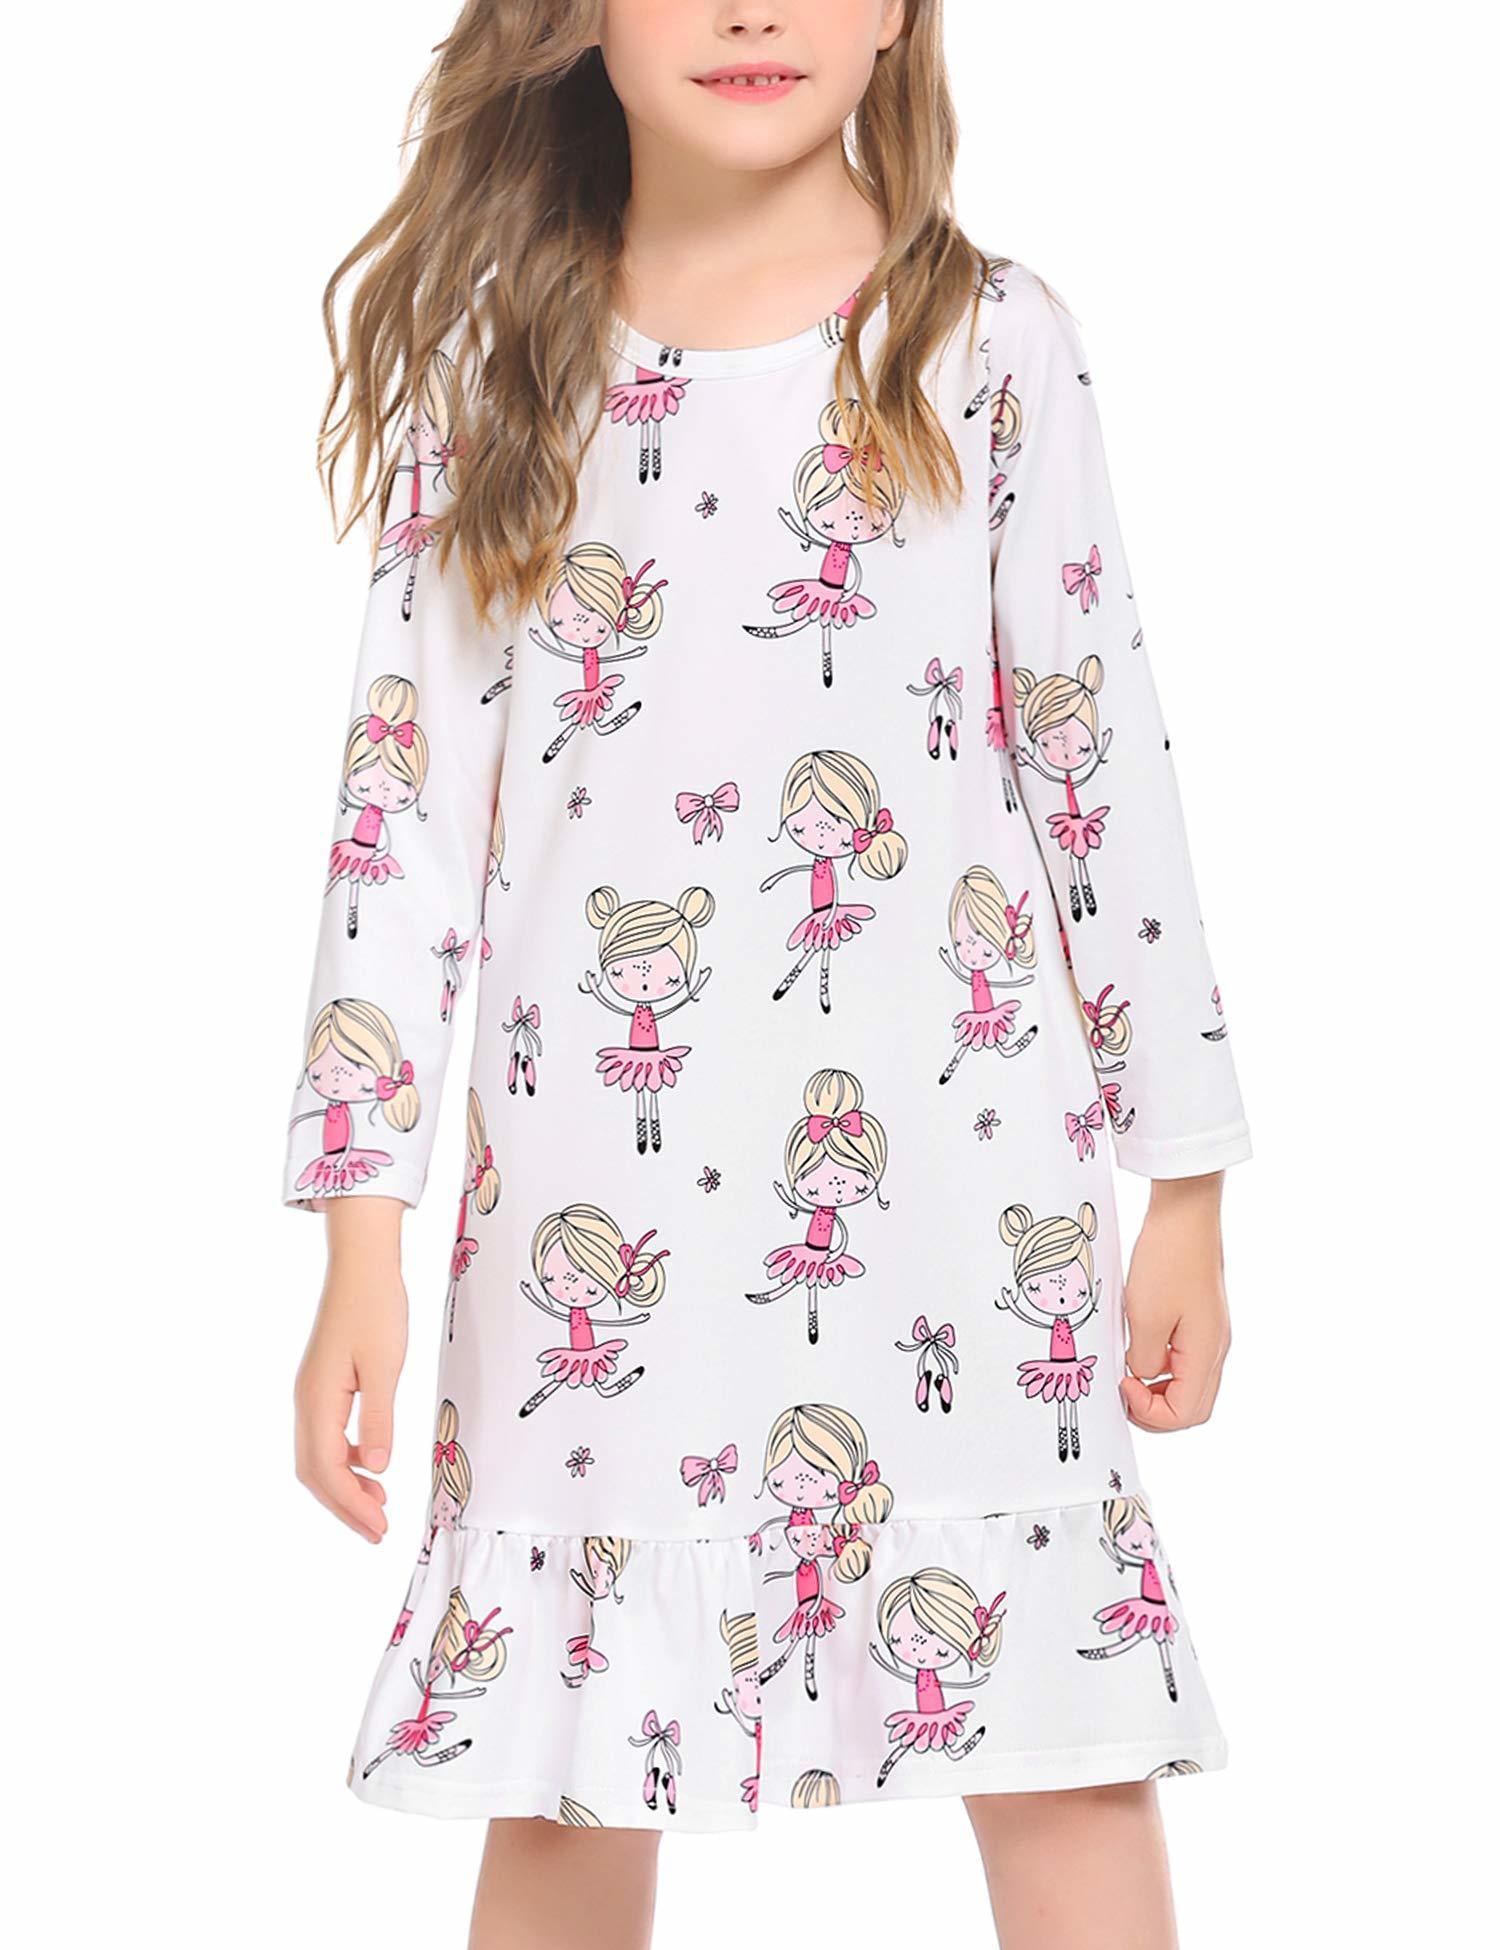 HuaAngel Casual Mother Daughter Winter Nightgowns Long Sleeve Dress Family  Matching Pajamas Nightgown Dress 